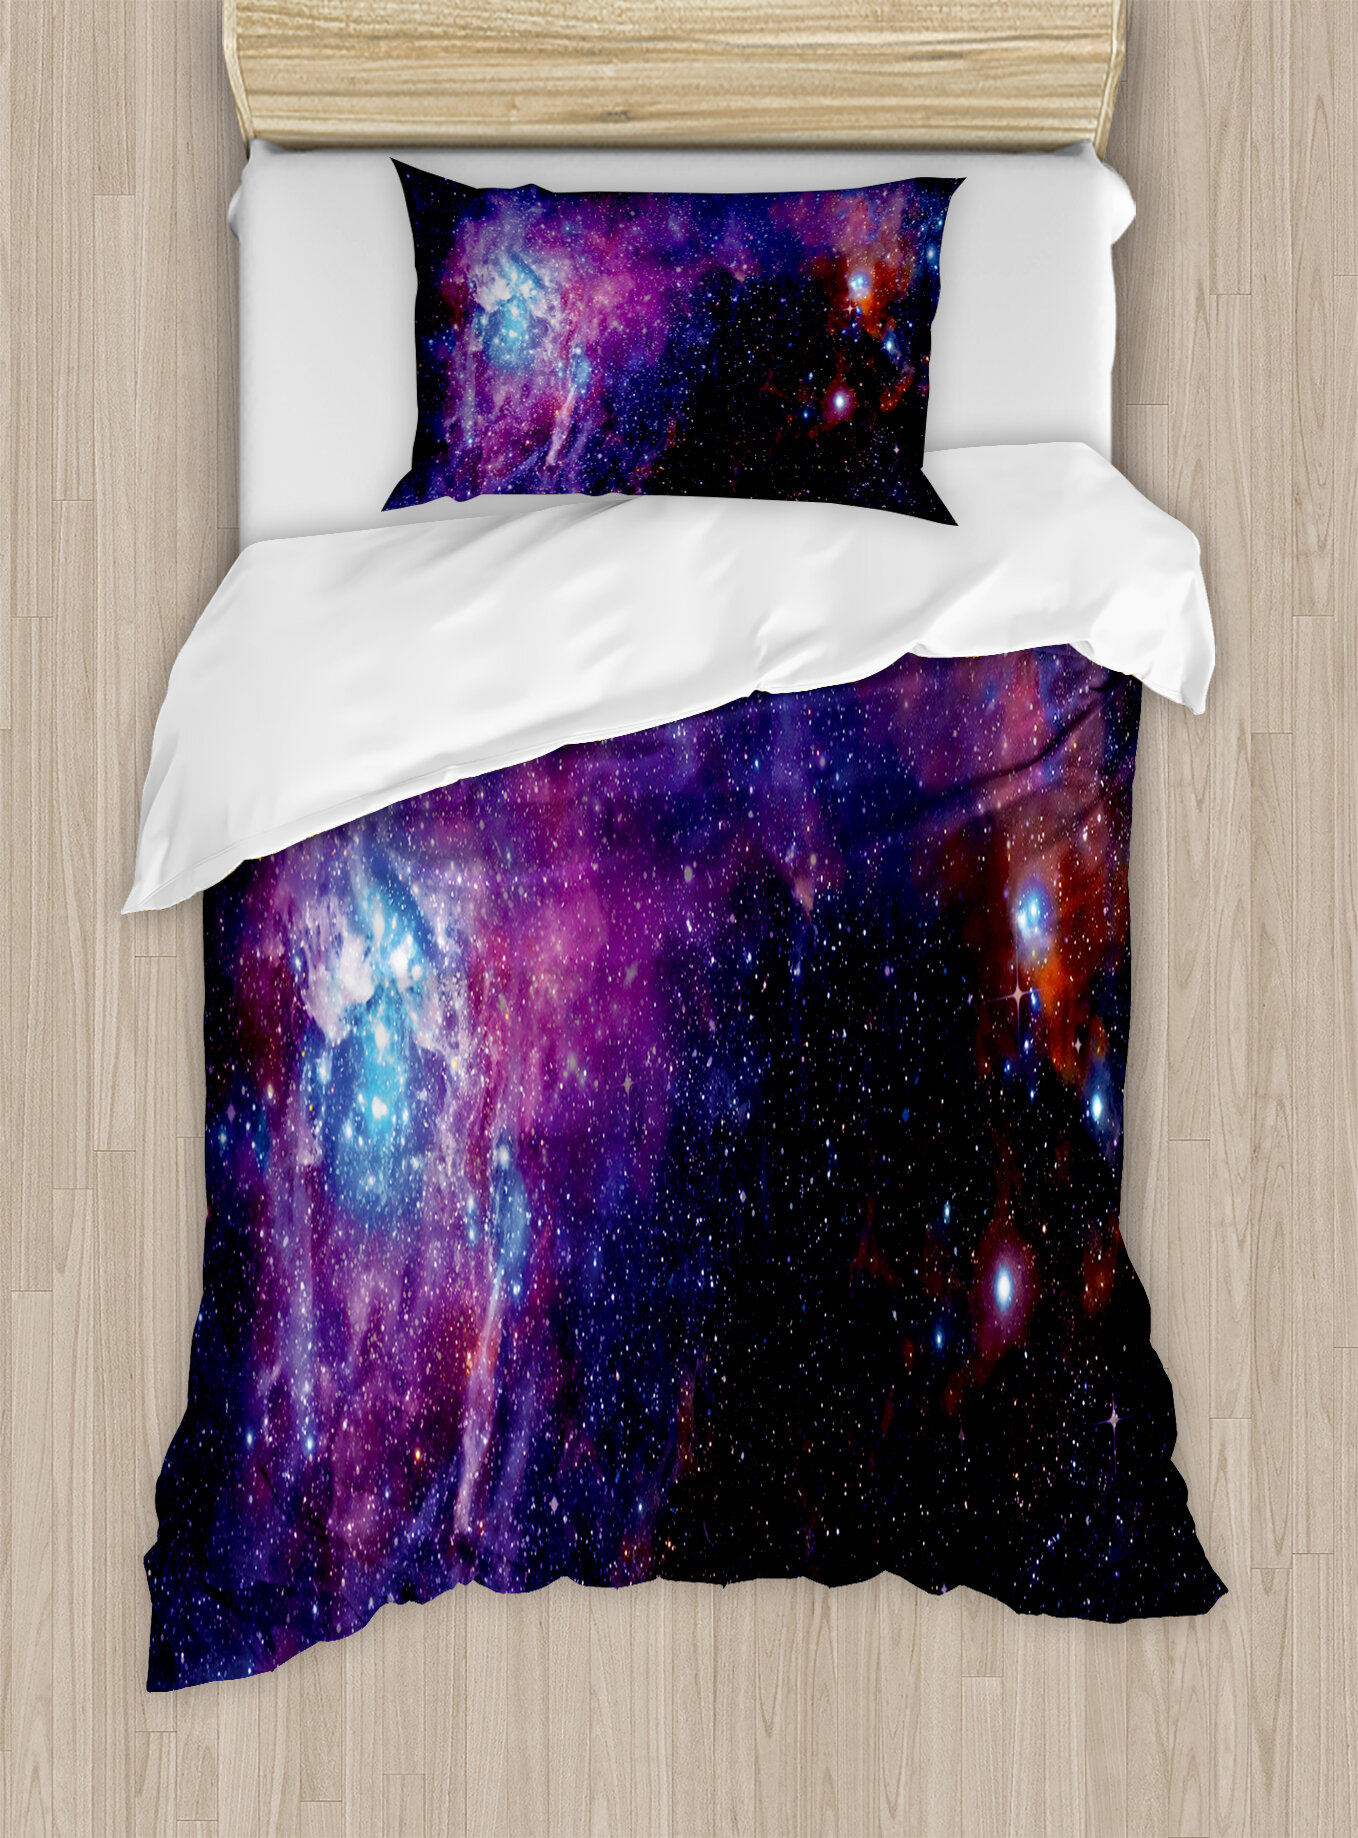 Soft Comfortable Top Sheet Decorative Bedding 1 Piece Ambesonne Space Cat Flat Sheet Felline Astronaut Theme Funny Illustration with Science Themes Exploring Universe Twin Size Multicolor